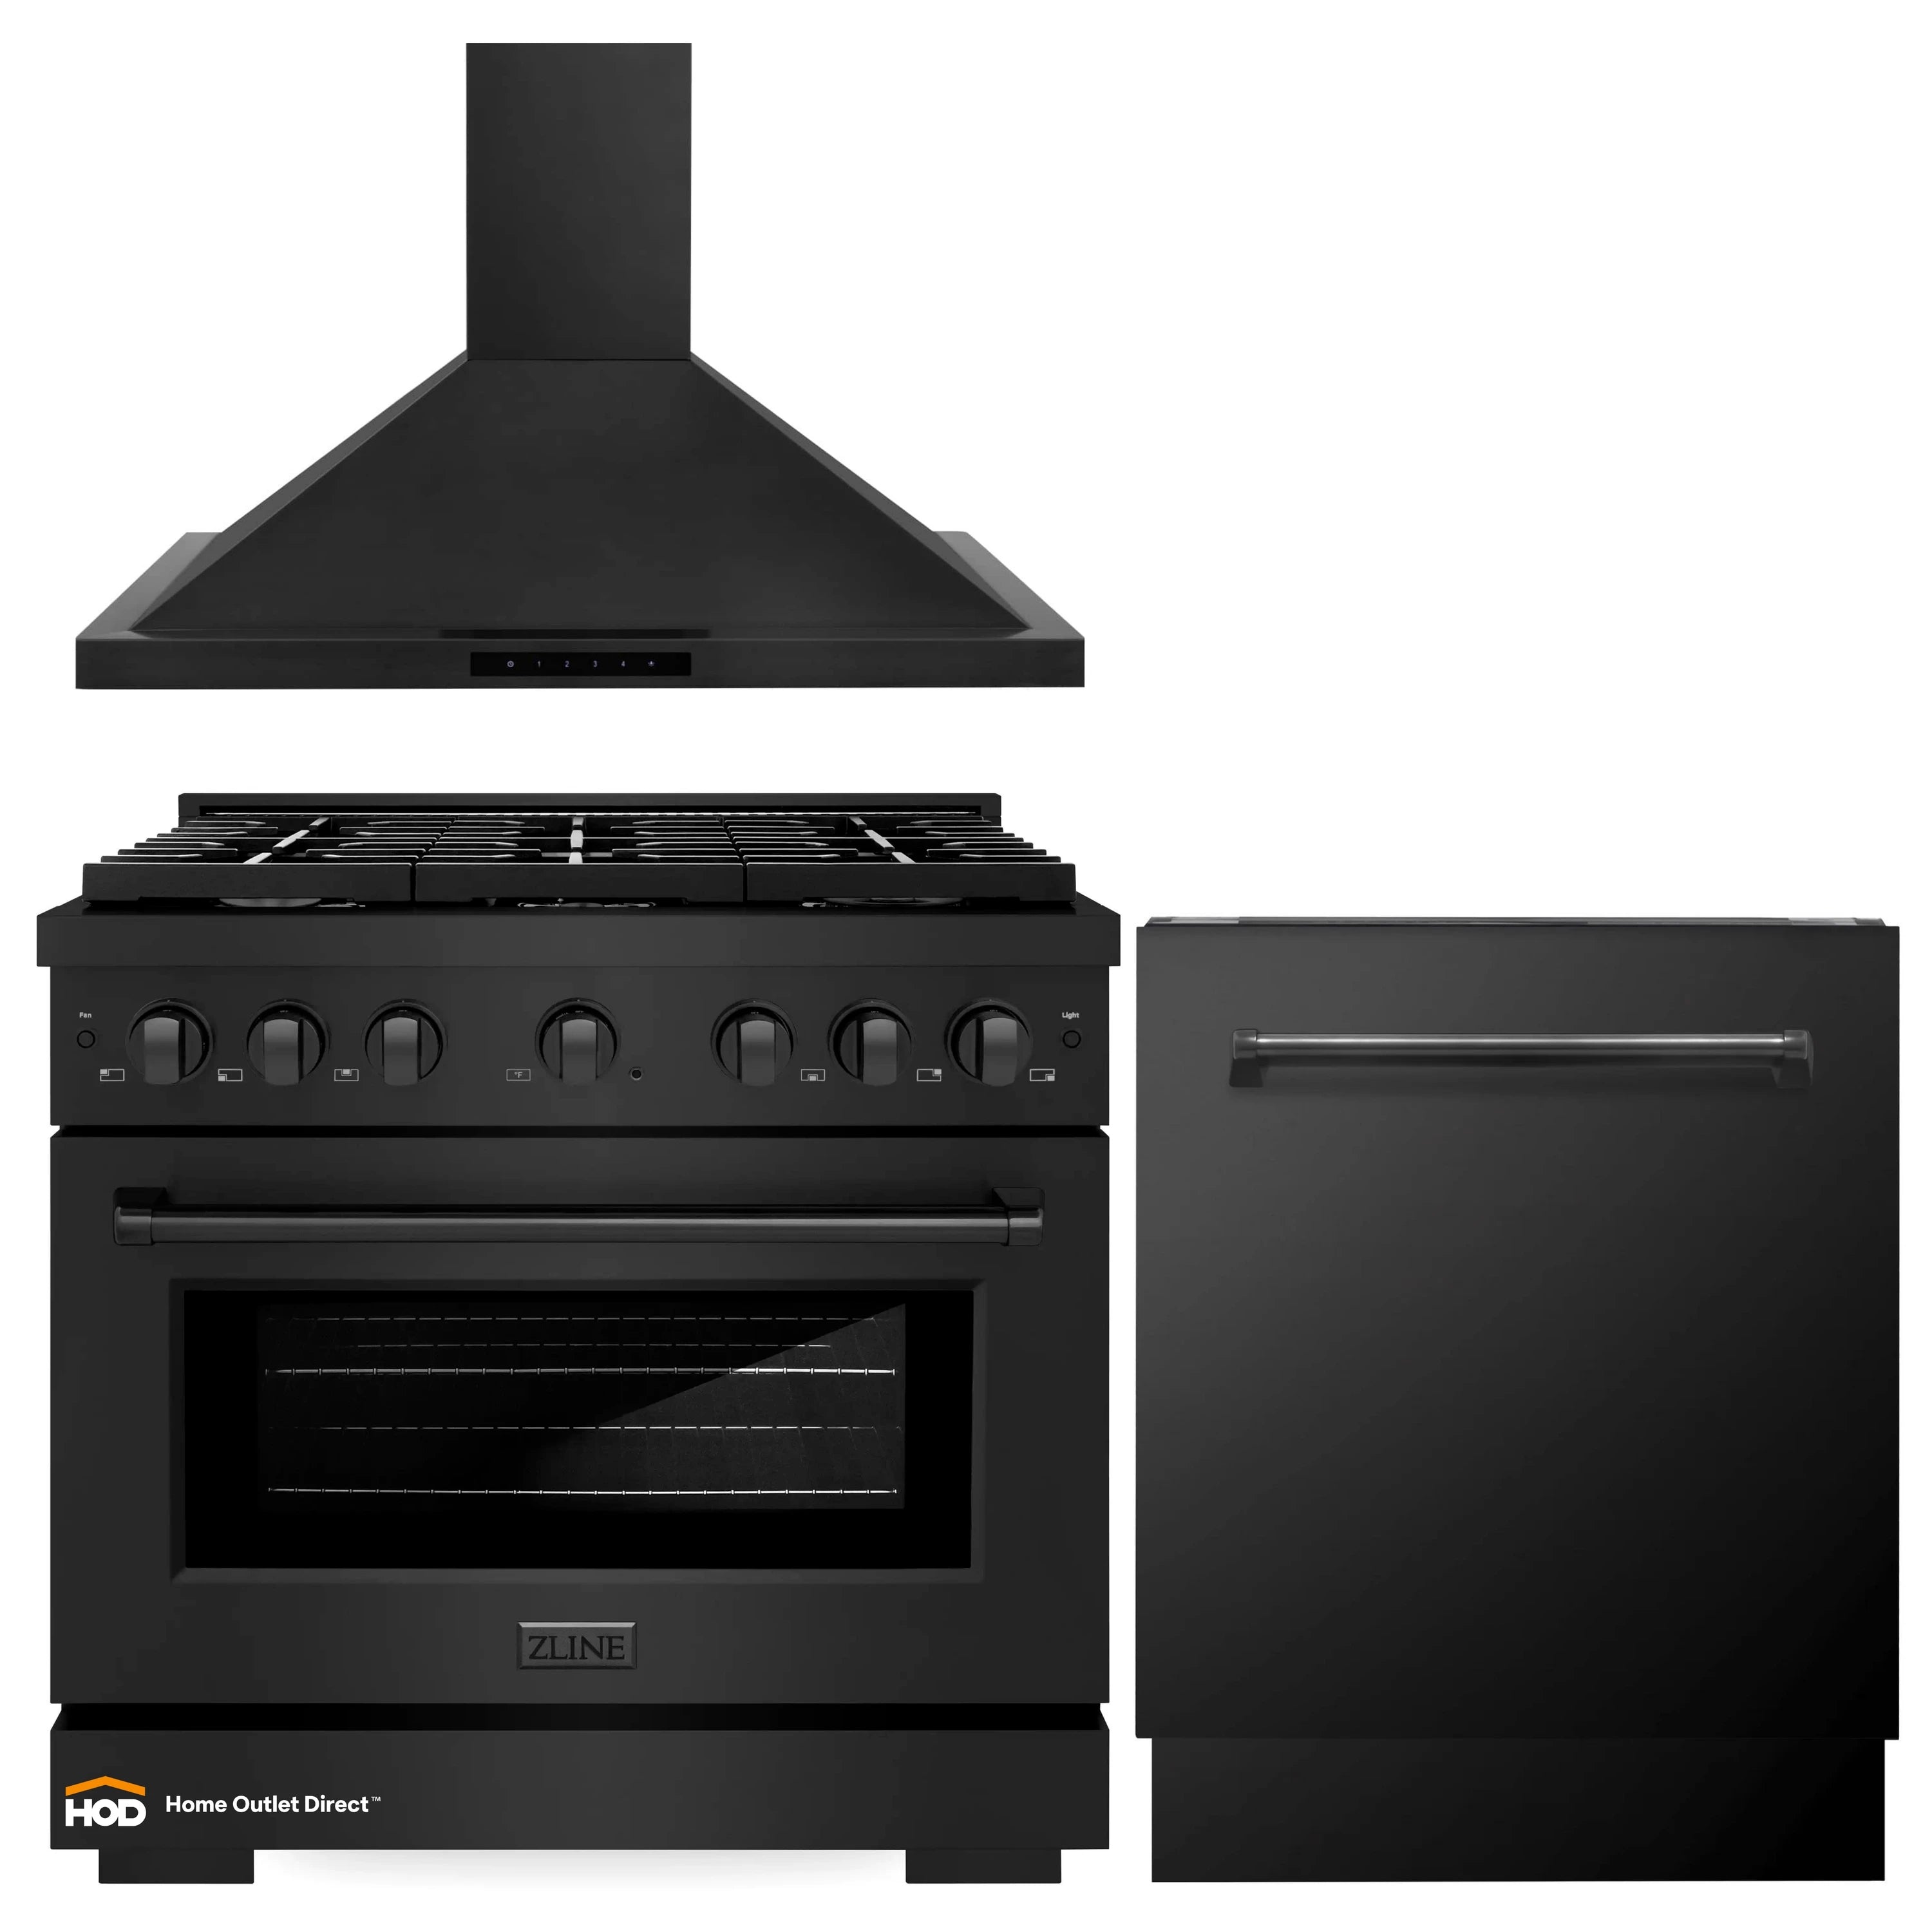 ZLINE 3-Piece Appliance Package - 36-Inch Gas Range, Convertible Wall Mount Hood, and 3-Rack Dishwasher in Black Stainless Steel (3KP-RGBRH36-DWV)